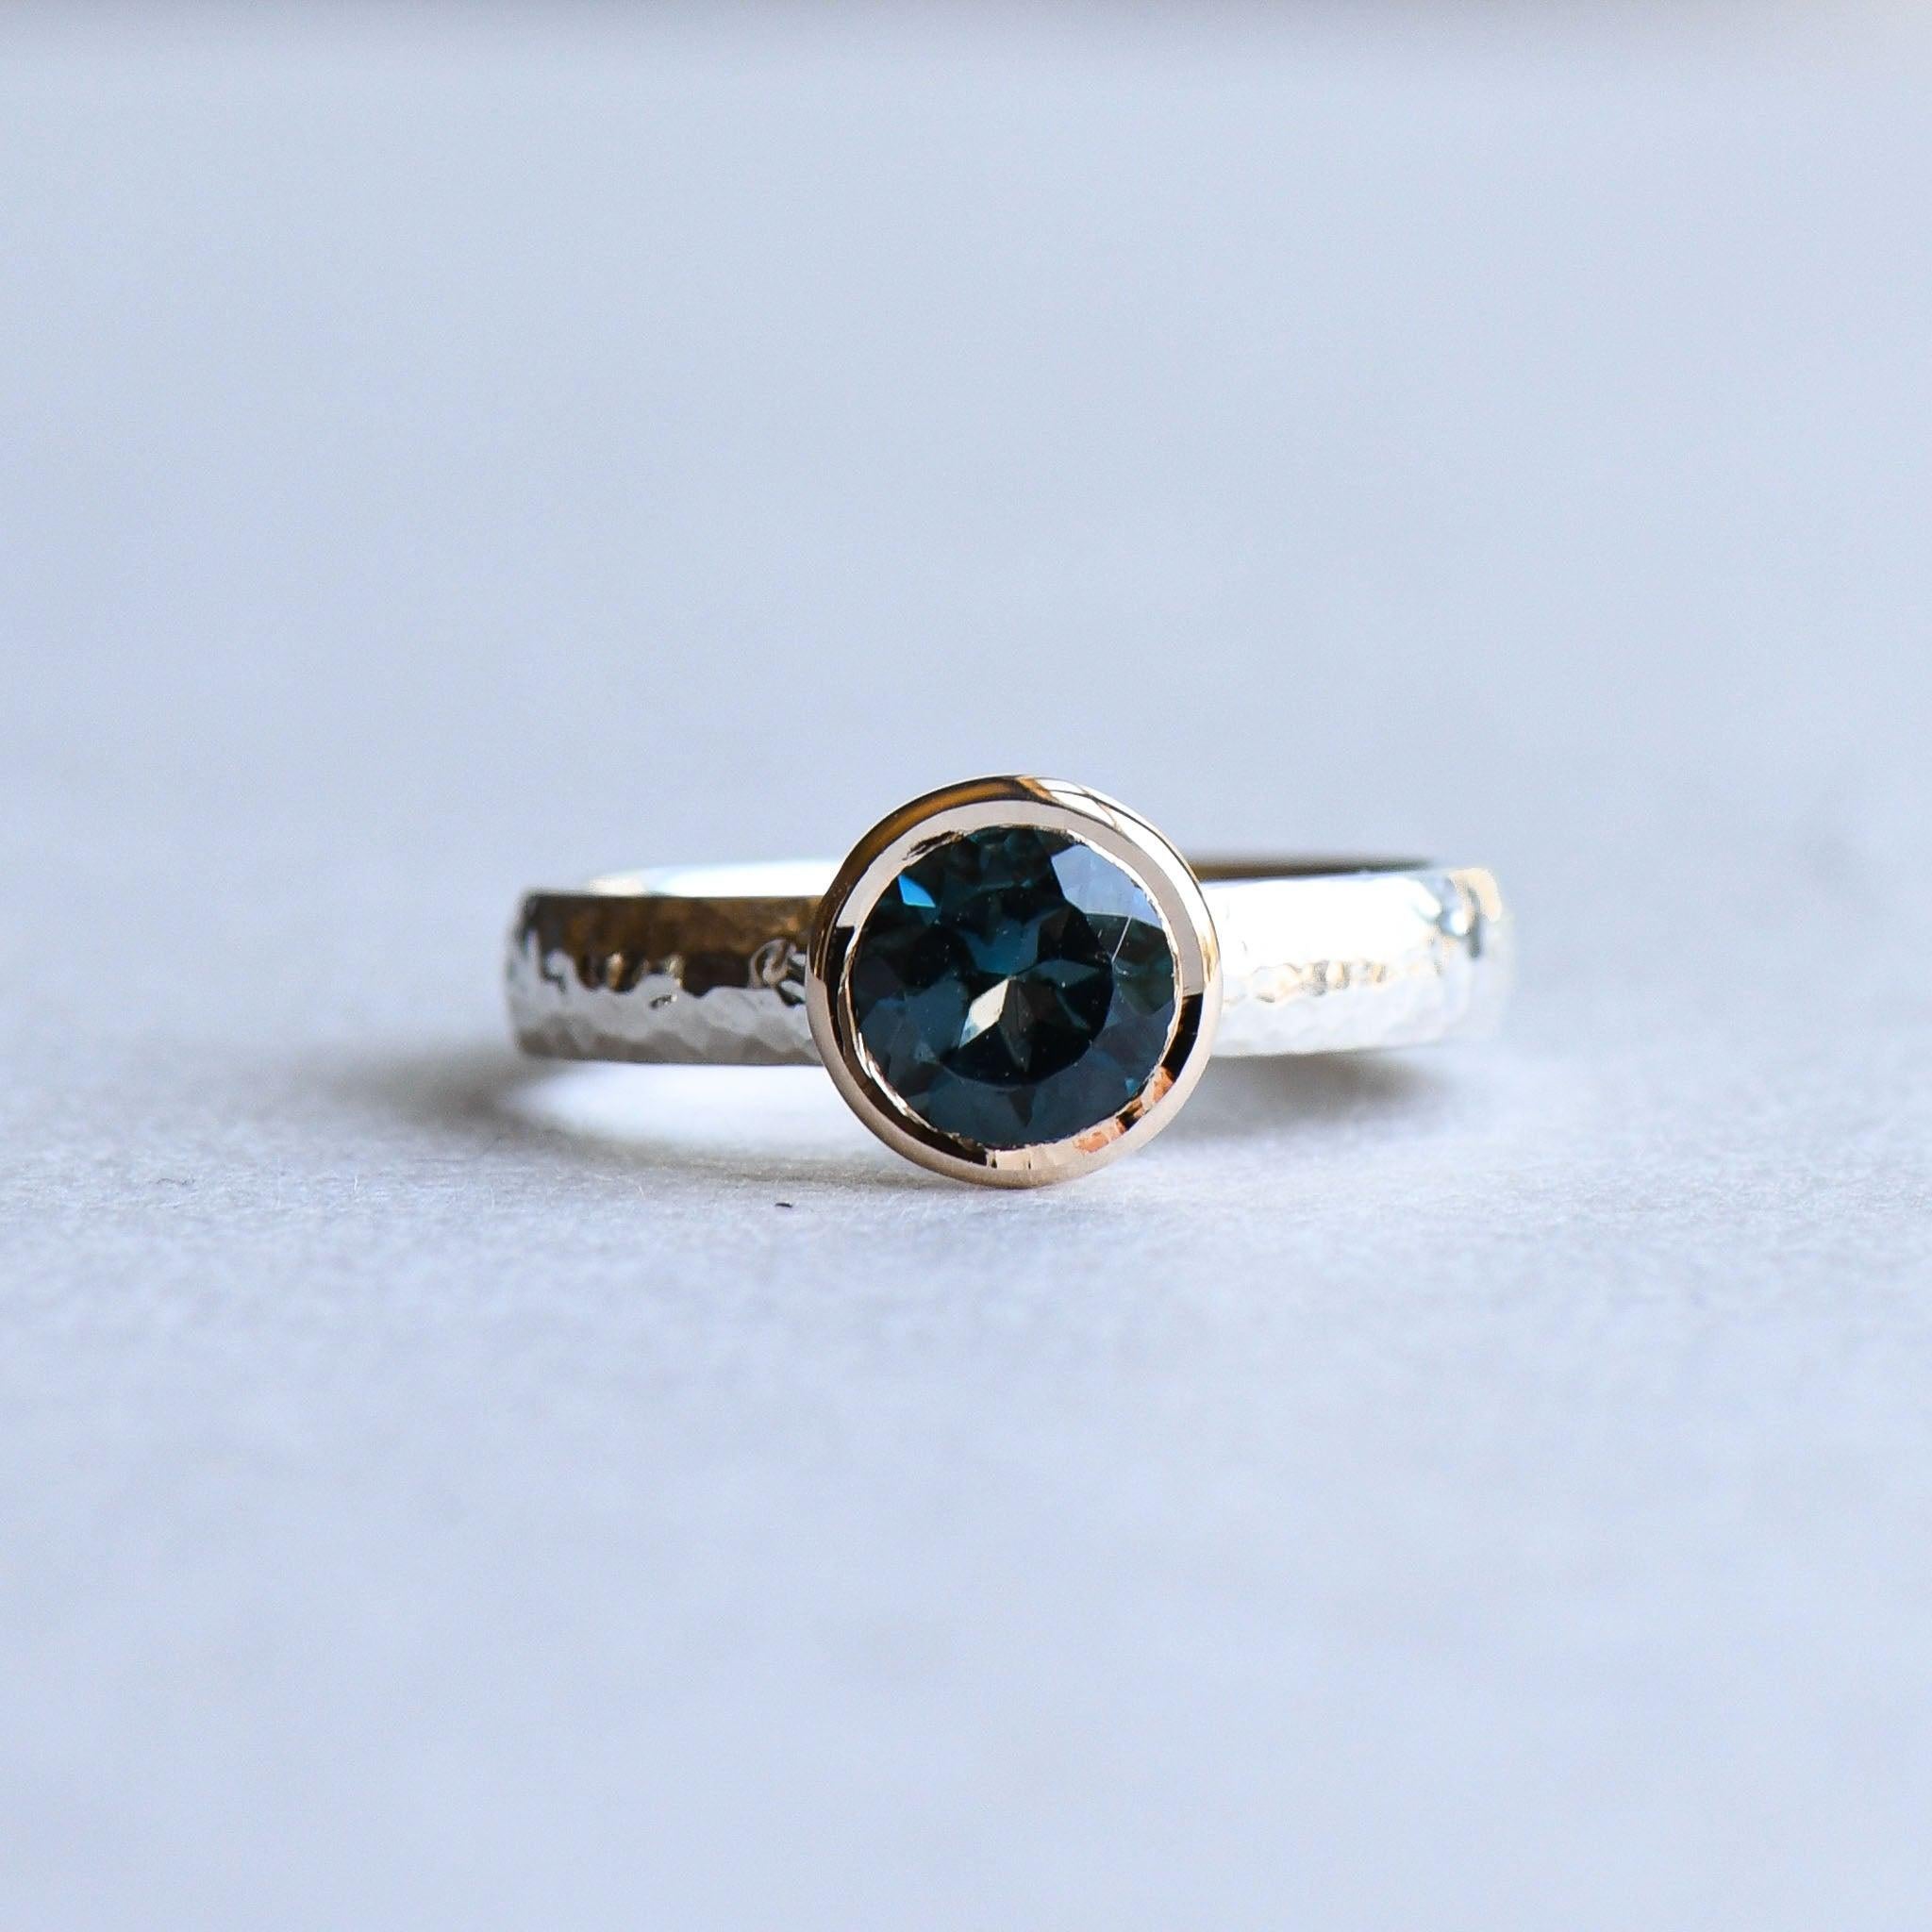 For Sale:  Two Tone Hammered Ring, London Topaz Ring, 14k Bezel Gold with Sterling Silver 5